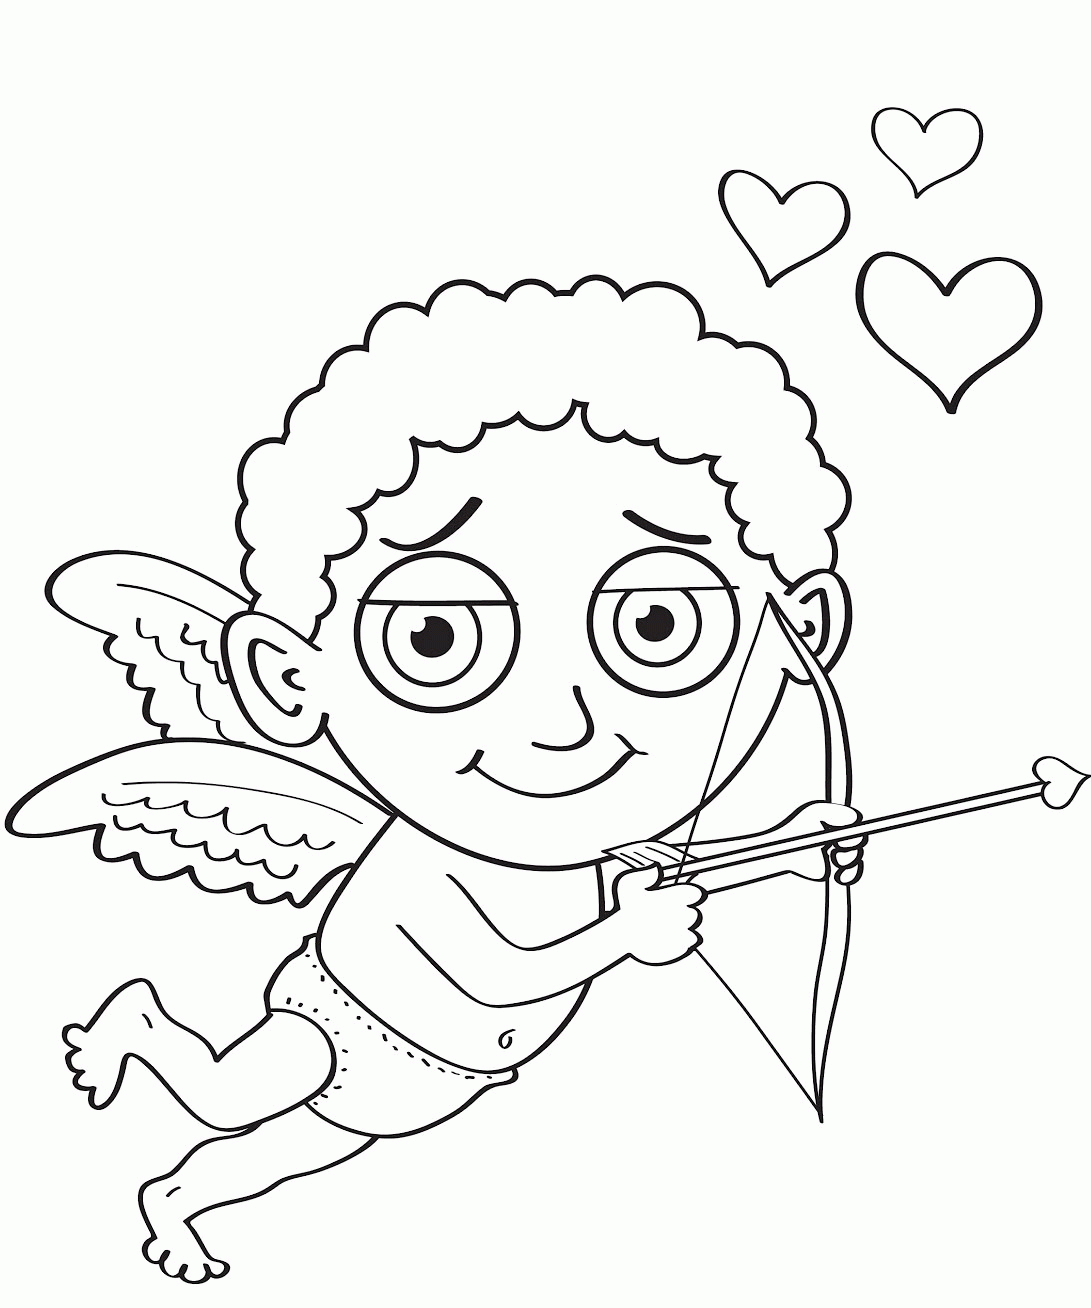 Cupid Coloring Pages and Book | Unique Coloring Pages